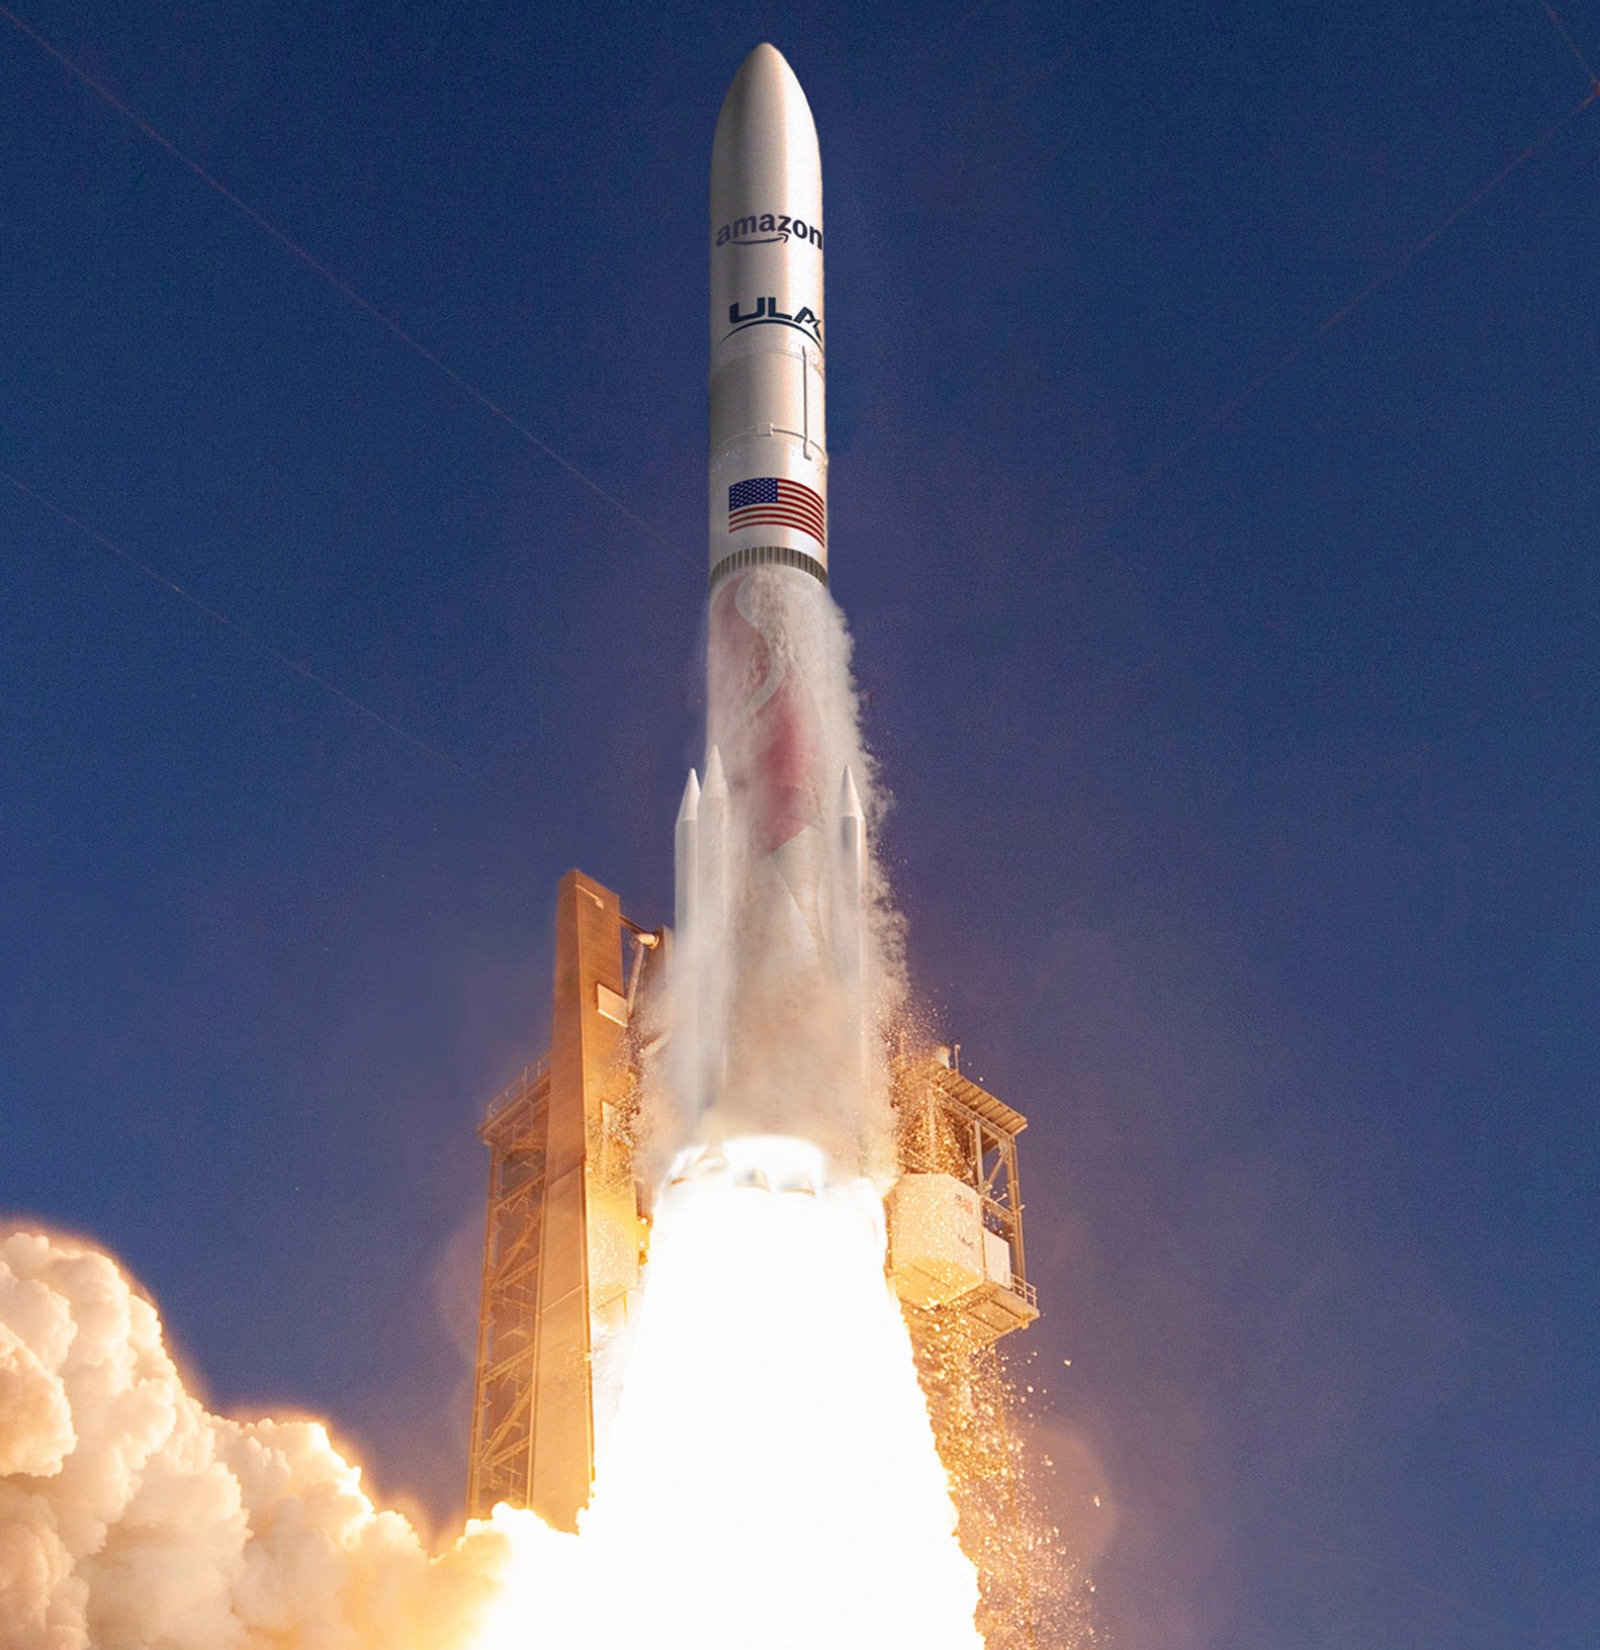 An image of a rocket launch. The rocket has Amazon's logo on it and a flag of the United States. 